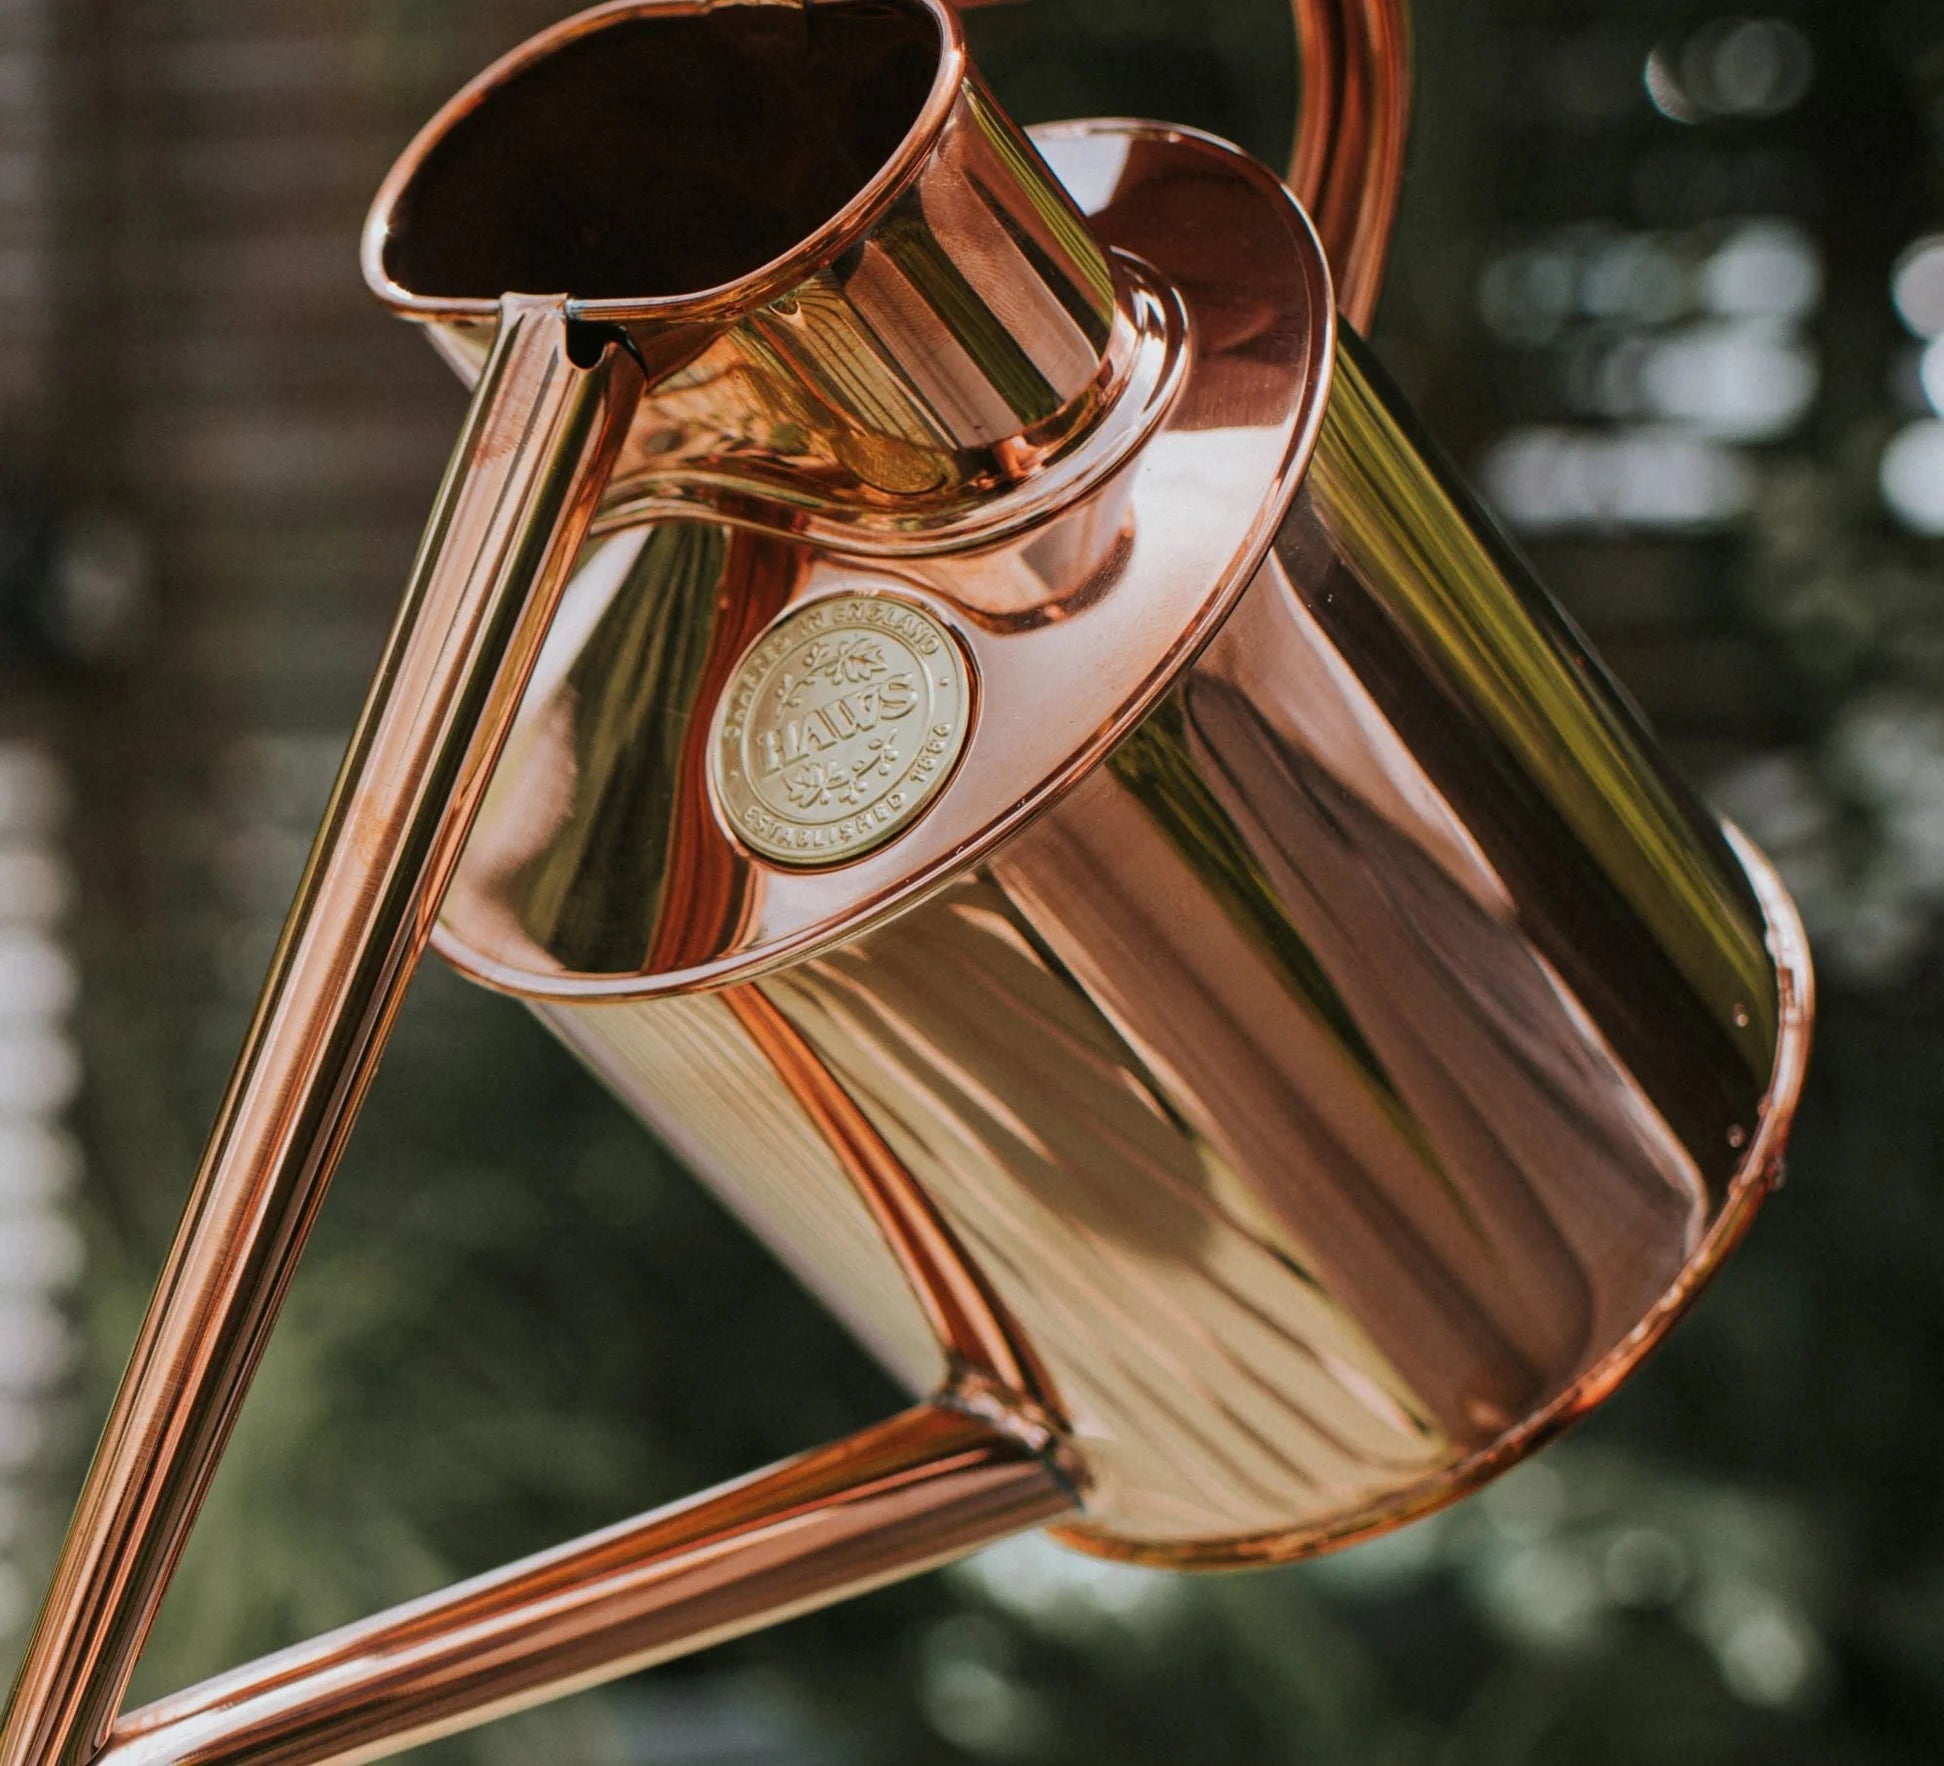 Haws Rowley Ripple Watering Can - 2 Pint Copper close up picture